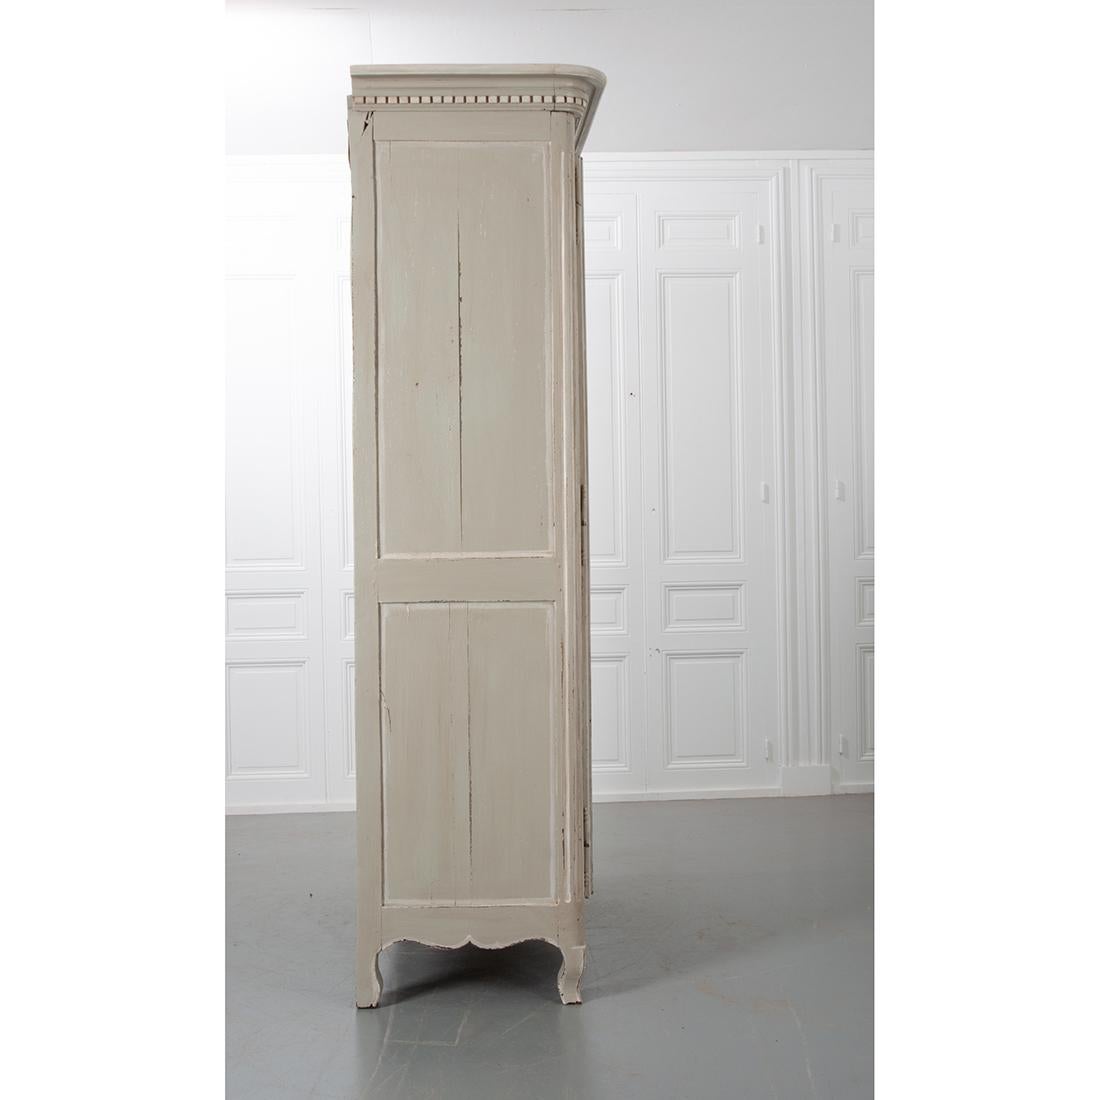 A nice, hand carved and painted armoire from 19th century France. It is crowned with dentil molding and graced with two large, shapely paneled doors with beautiful carvings. Musical instruments and floral reliefs grace the center of each door. The